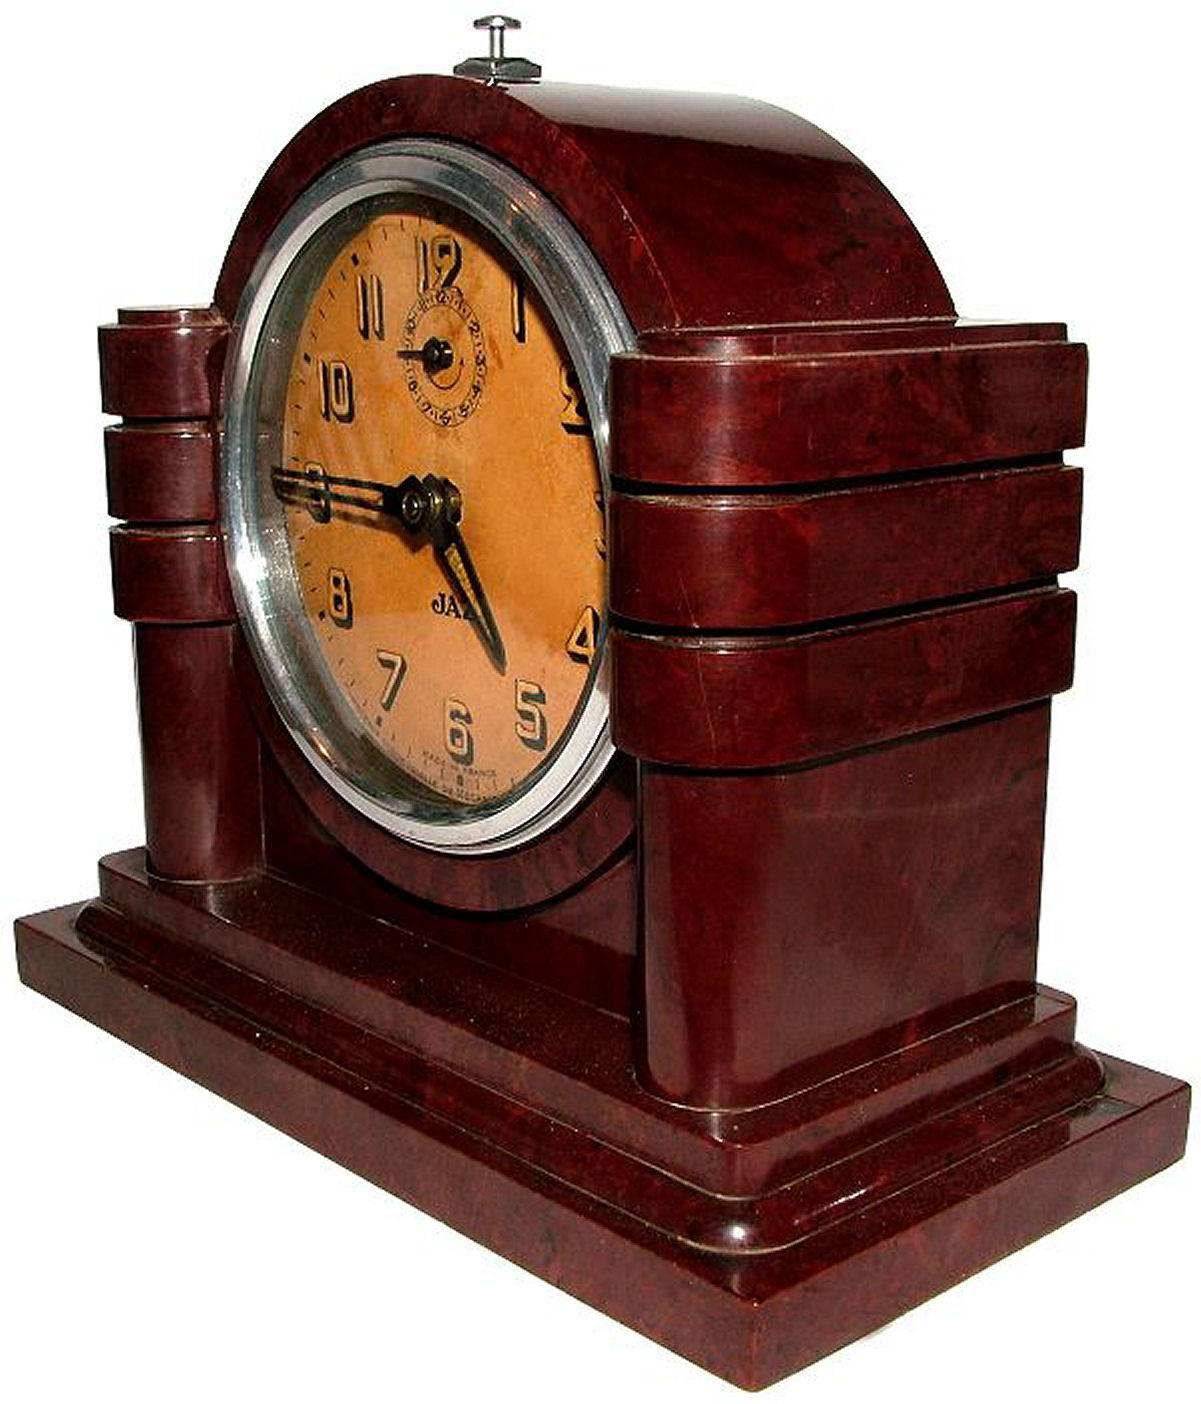 Very attractive 1930s Art Deco French bakelite clock by JAZ. This is one of the more rare and uncommon bakelite cases, ideal as a bedroom or office clock we thought. This delightful clock is in full working order and has been fully serviced by our